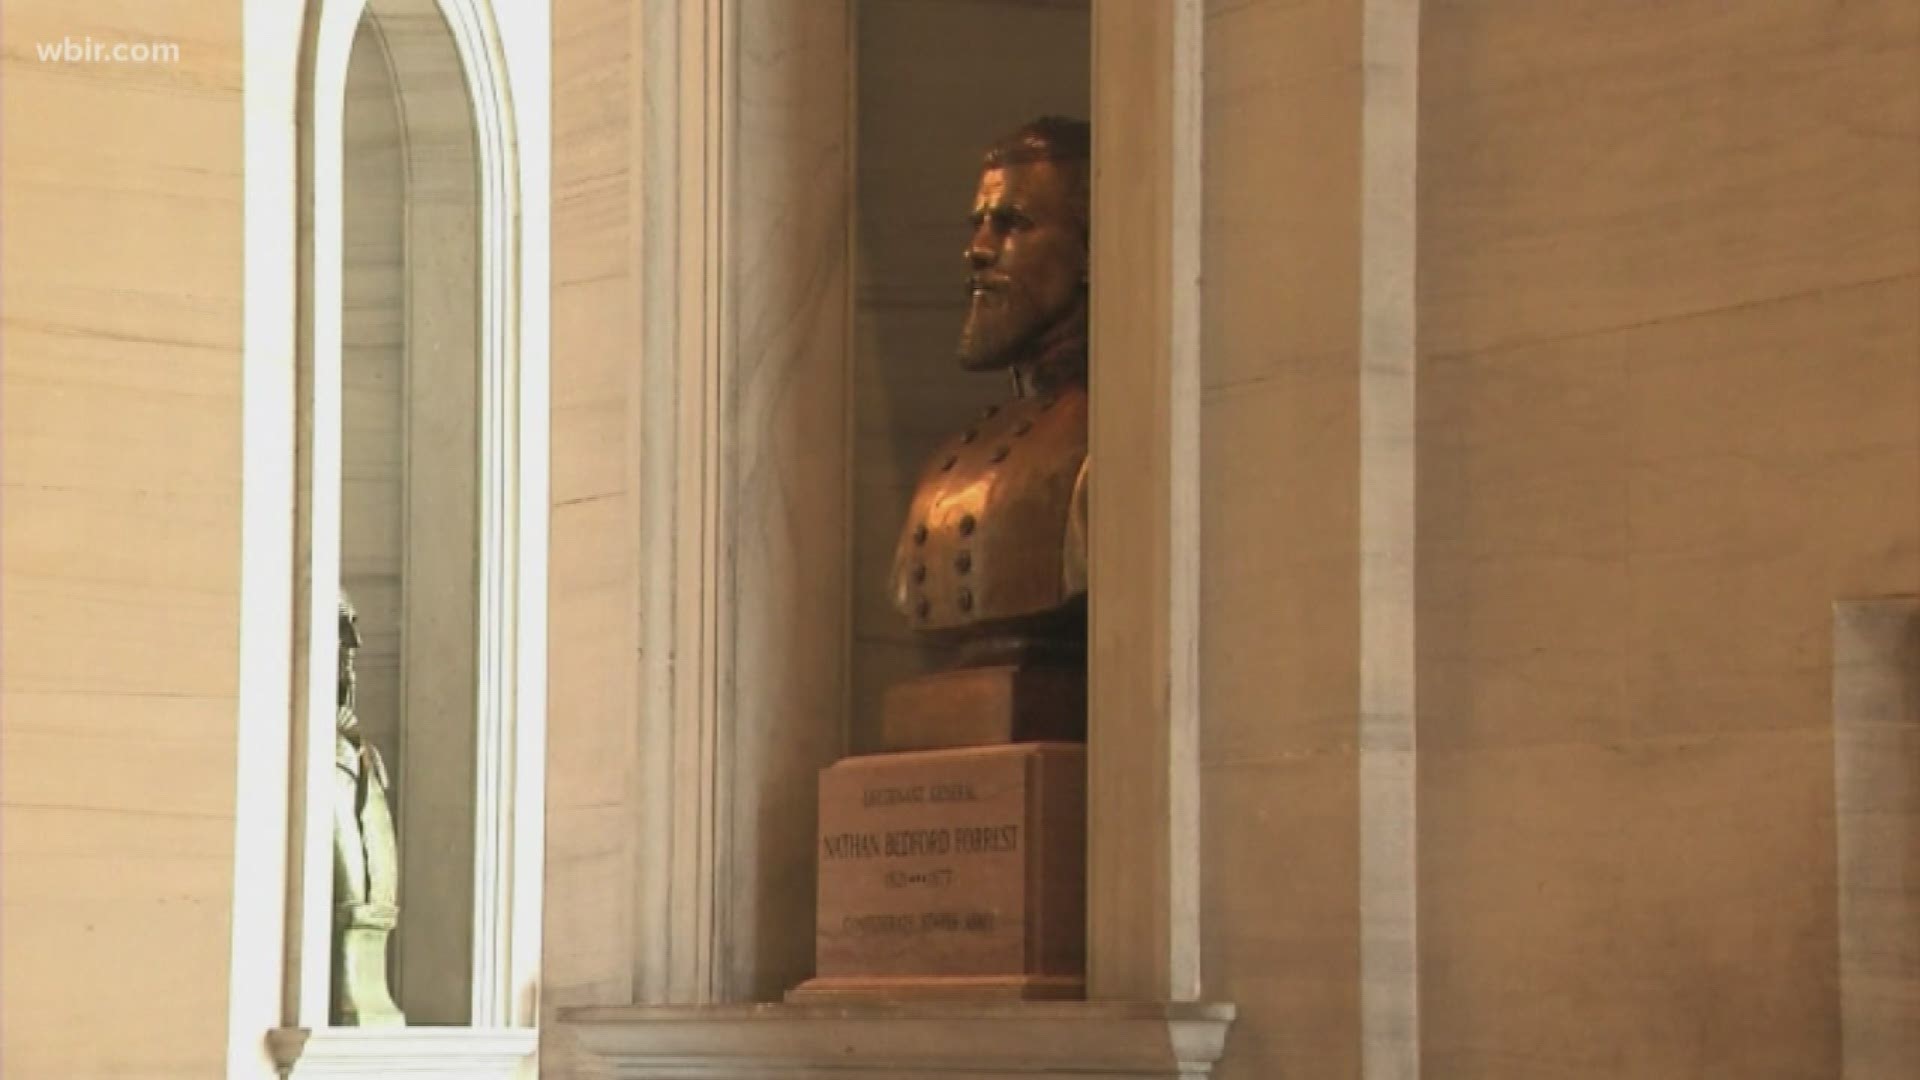 The statue of Nathan Bedford Forrest has been the center of many protests, but the governor has not yet called a meeting of the Capitol Commission to address it.